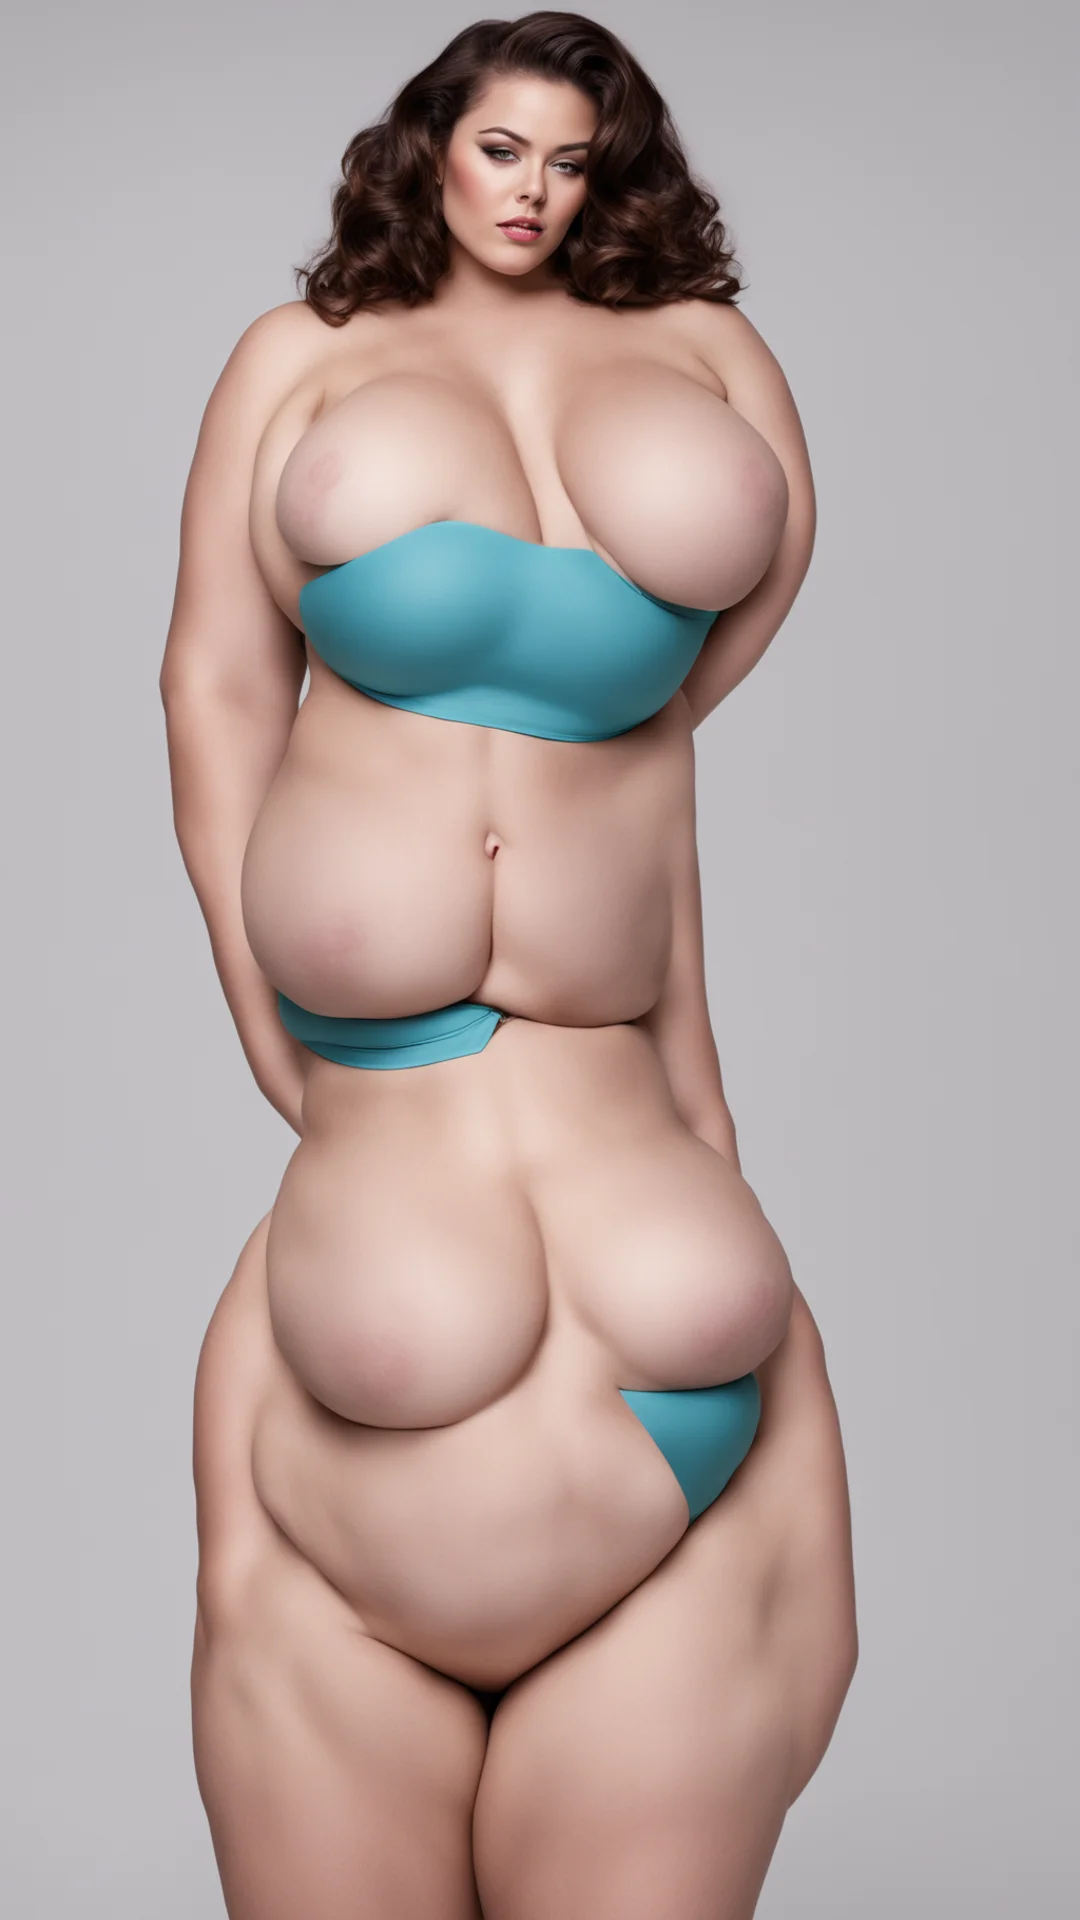 super voluptuous amazing awesome portrait 2 tall